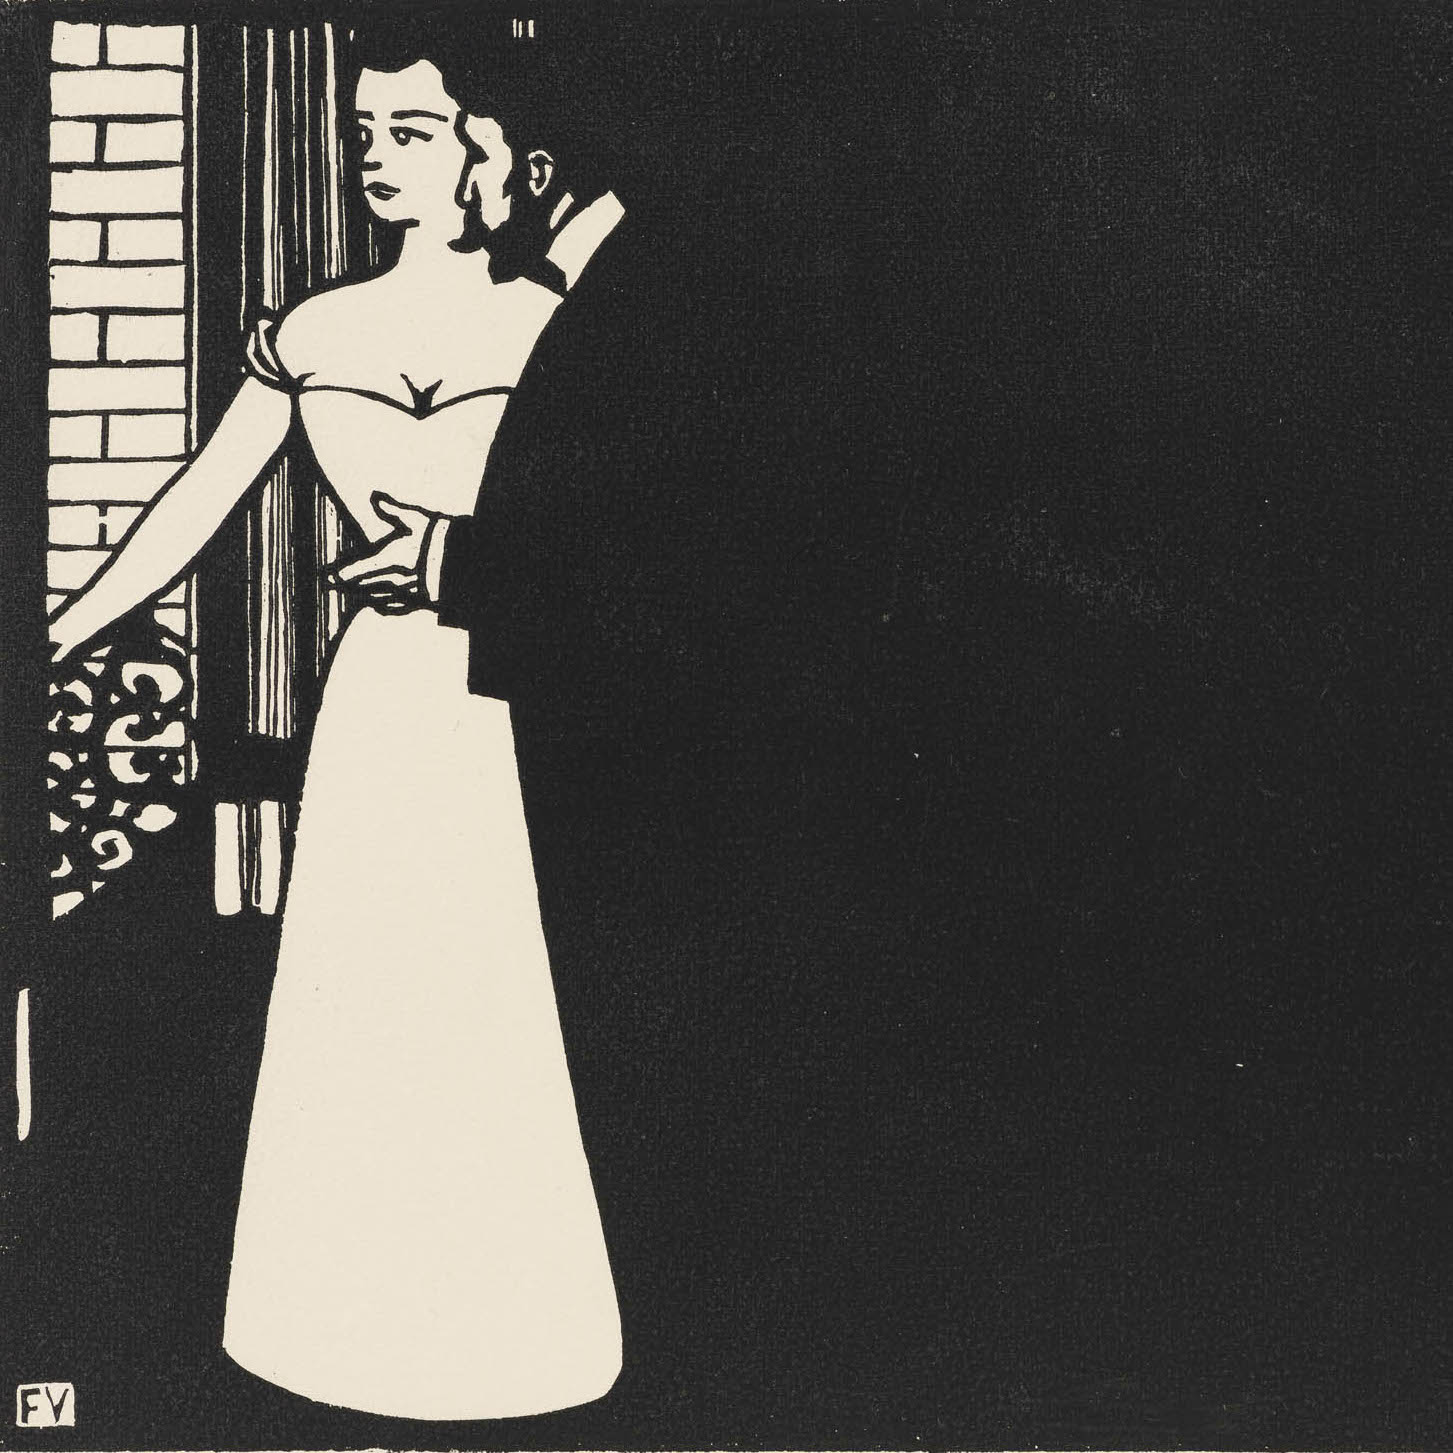 Images From A 1898 Book Of Felix Vallotton's Beautifully Stark Woodcuts